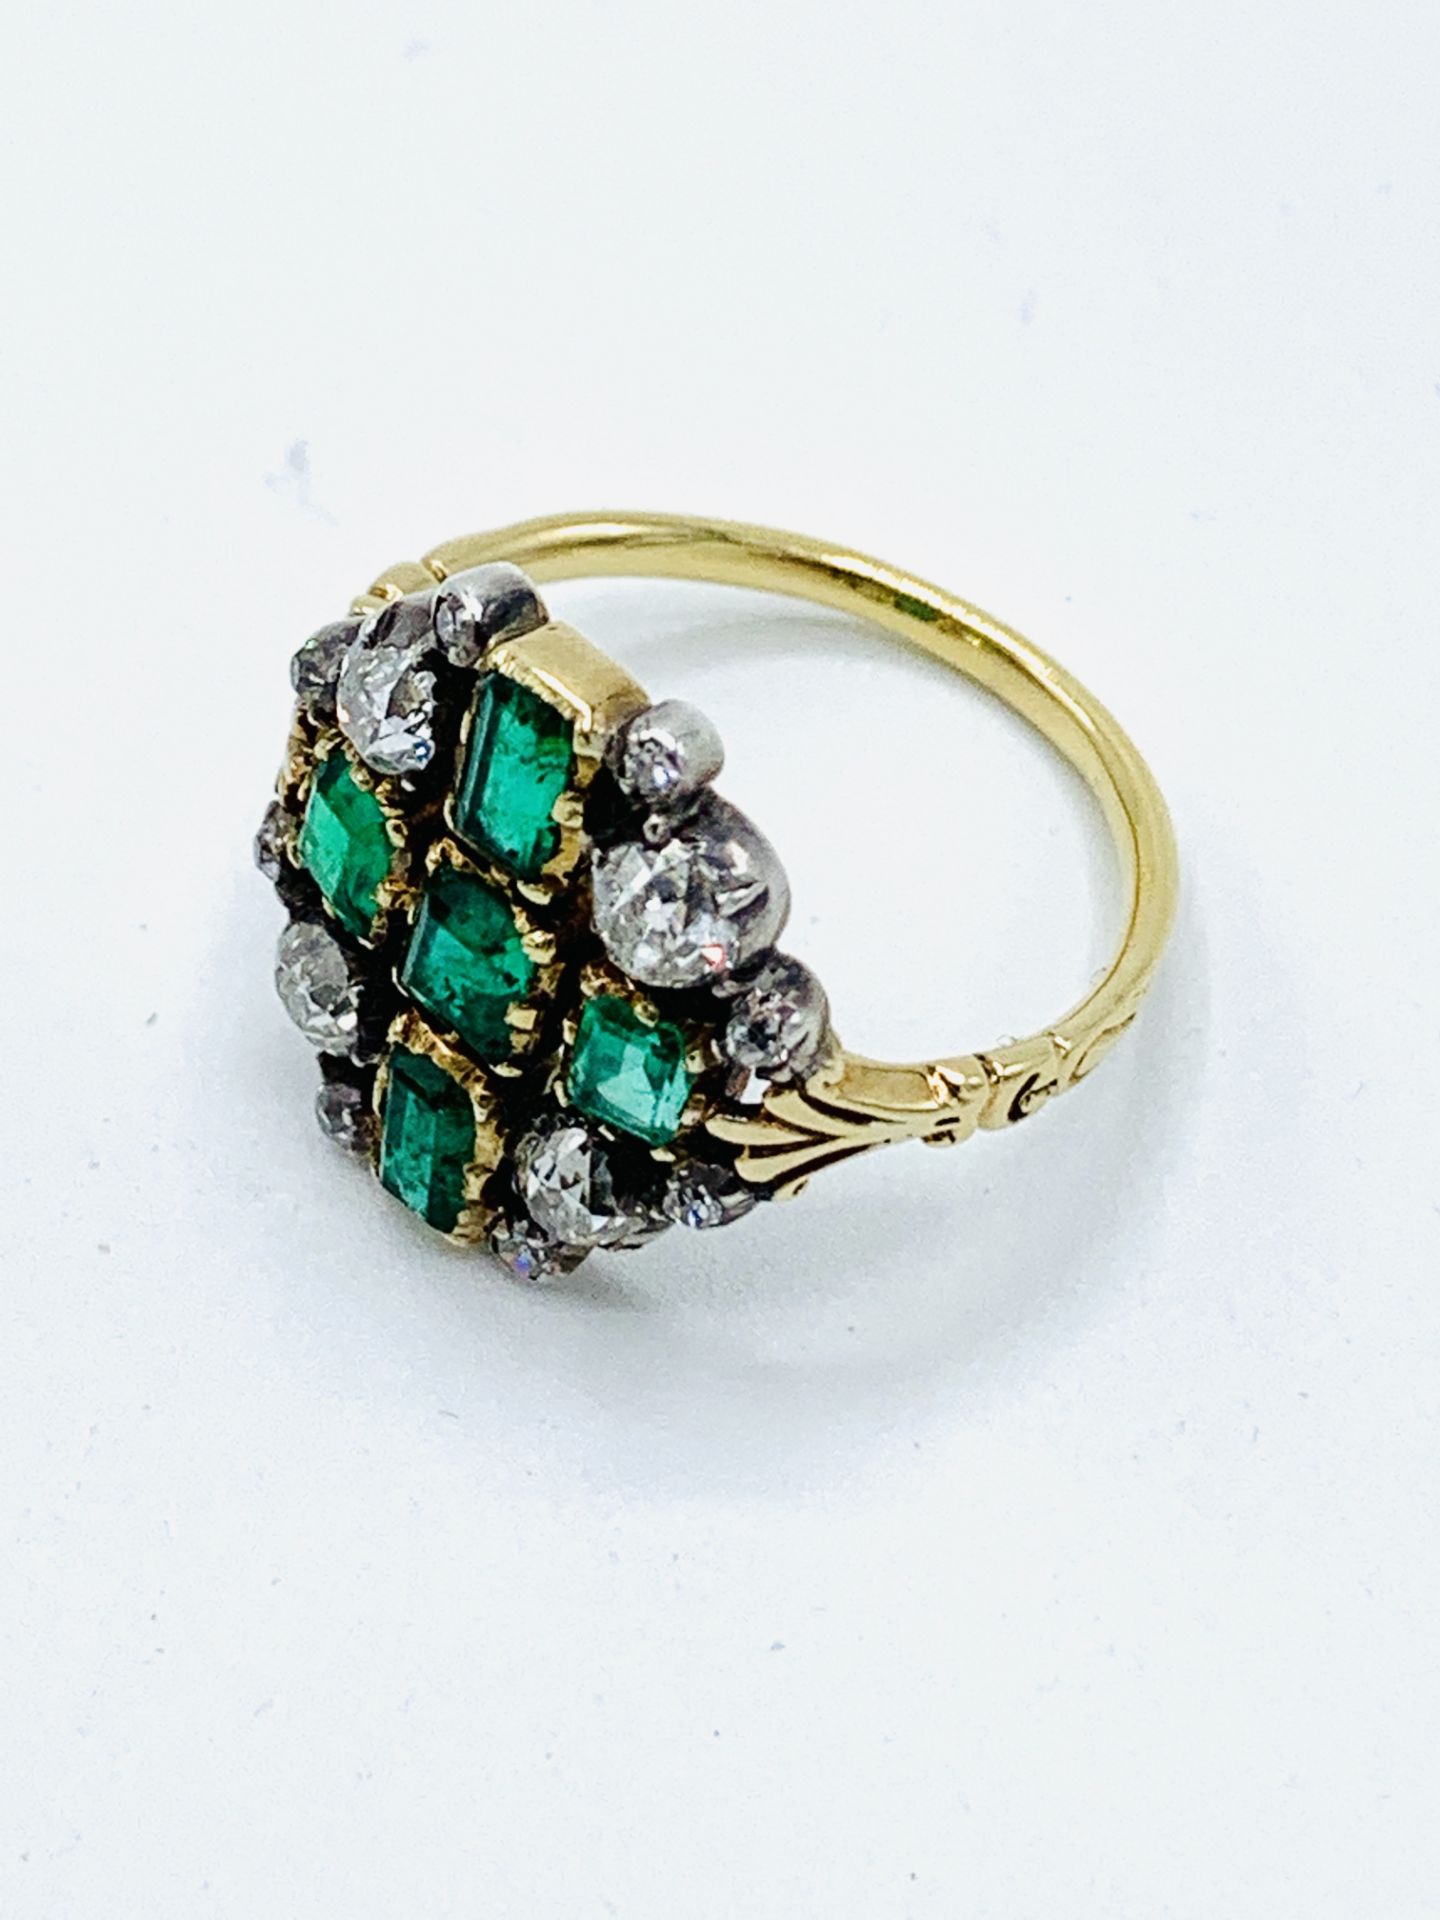 Yellow gold emerald and diamond ring - Image 3 of 5